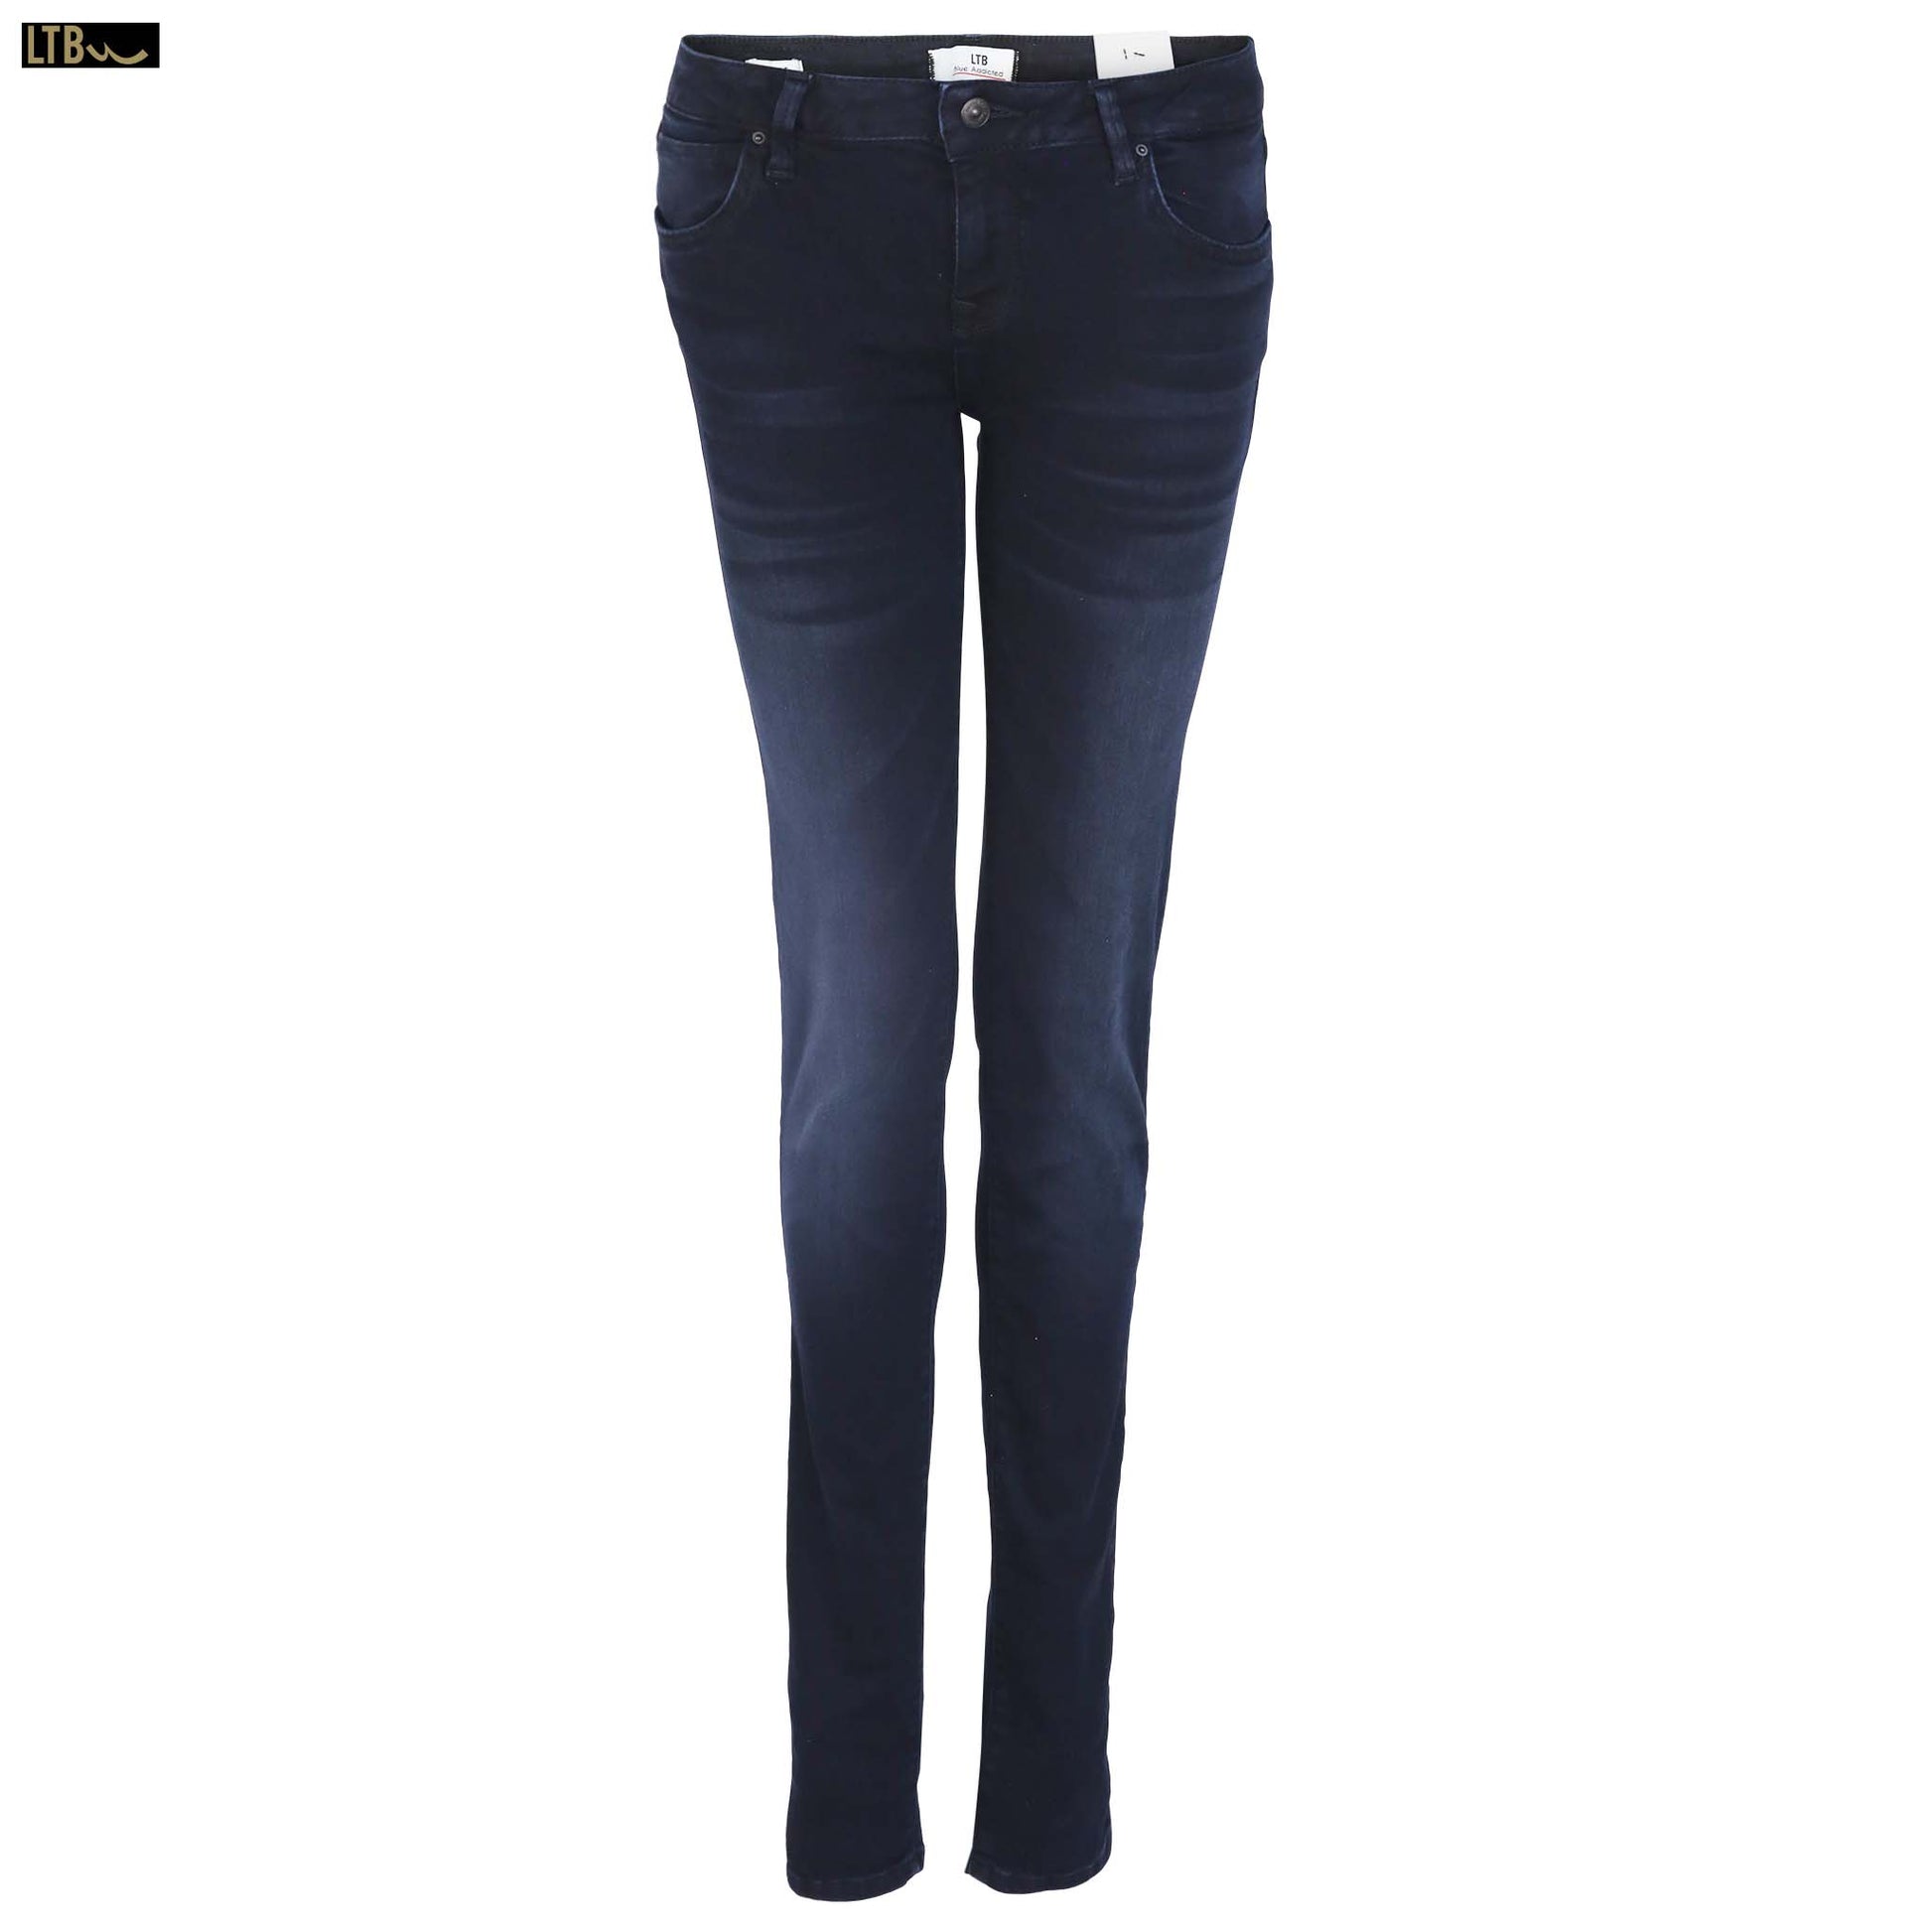 fashion tall woman ltb jeans nicole parvin